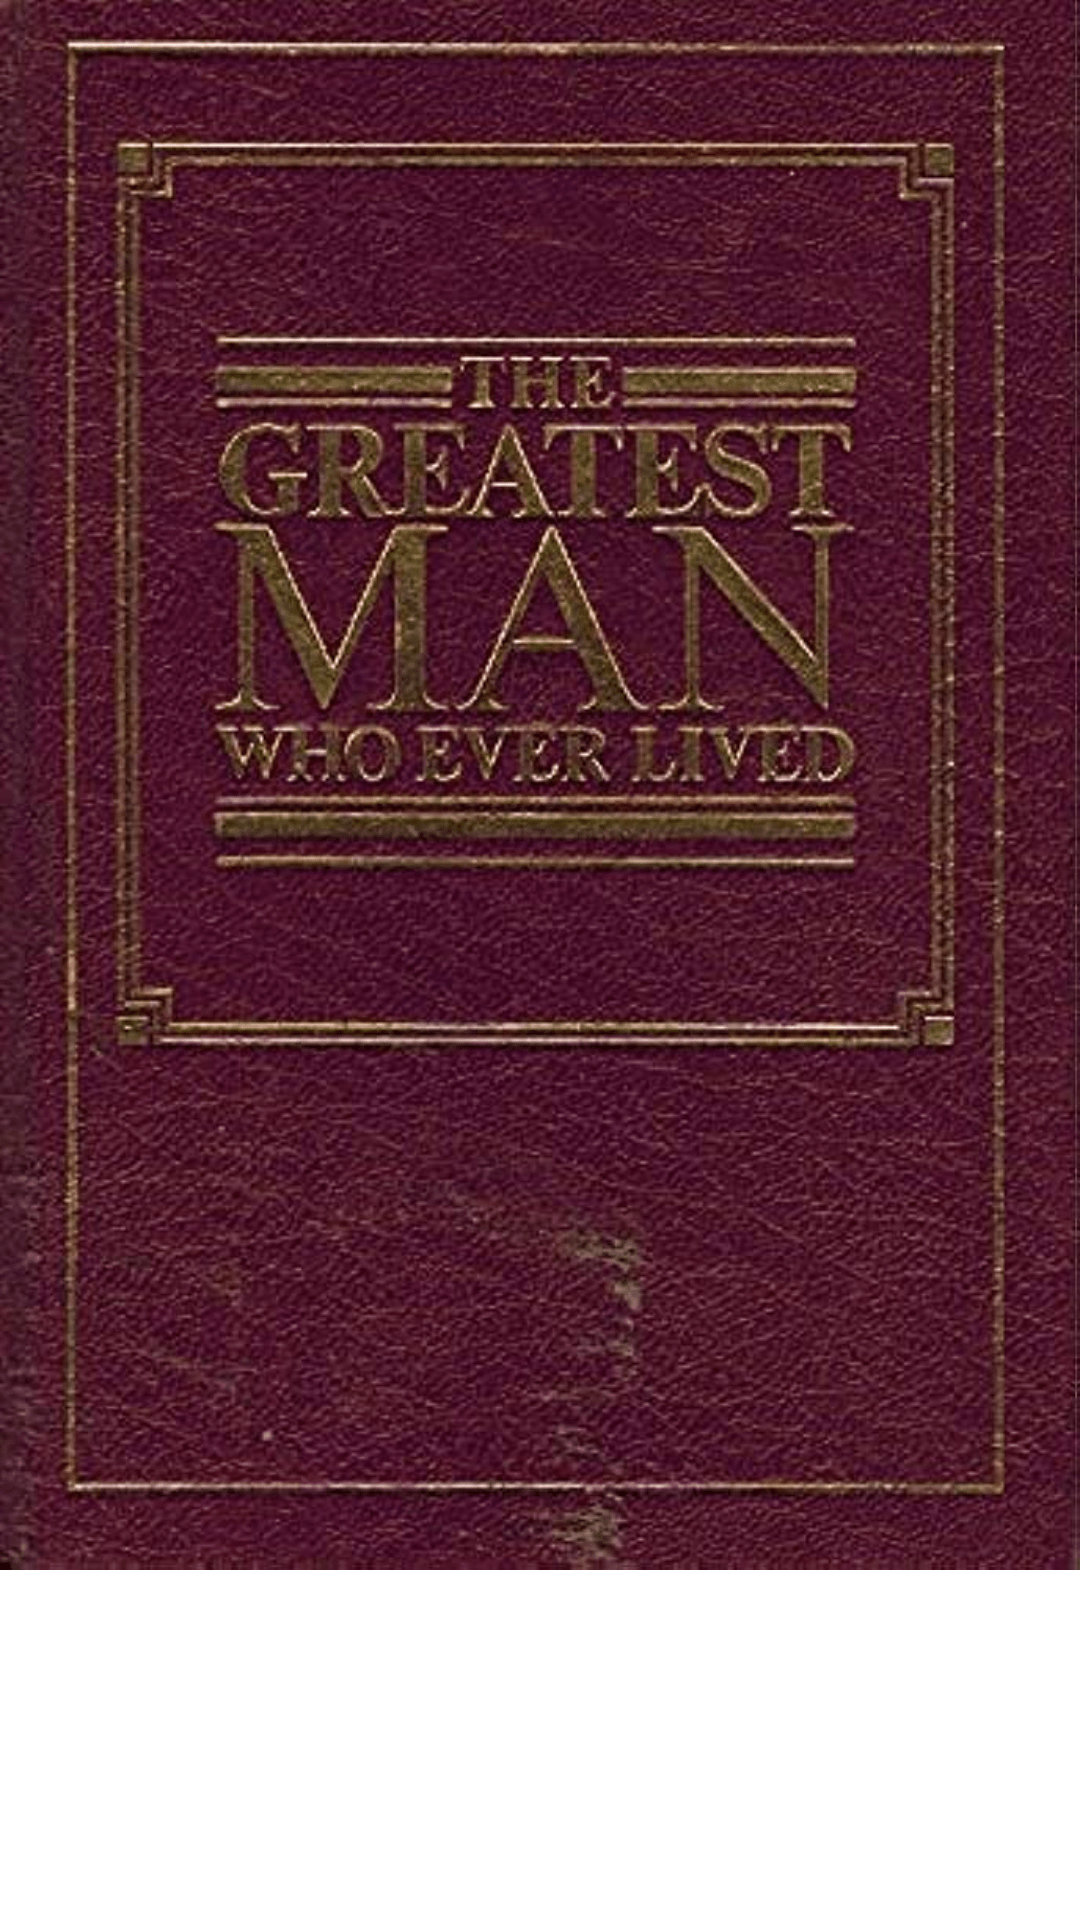 The Greatest Man Who Ever Lived